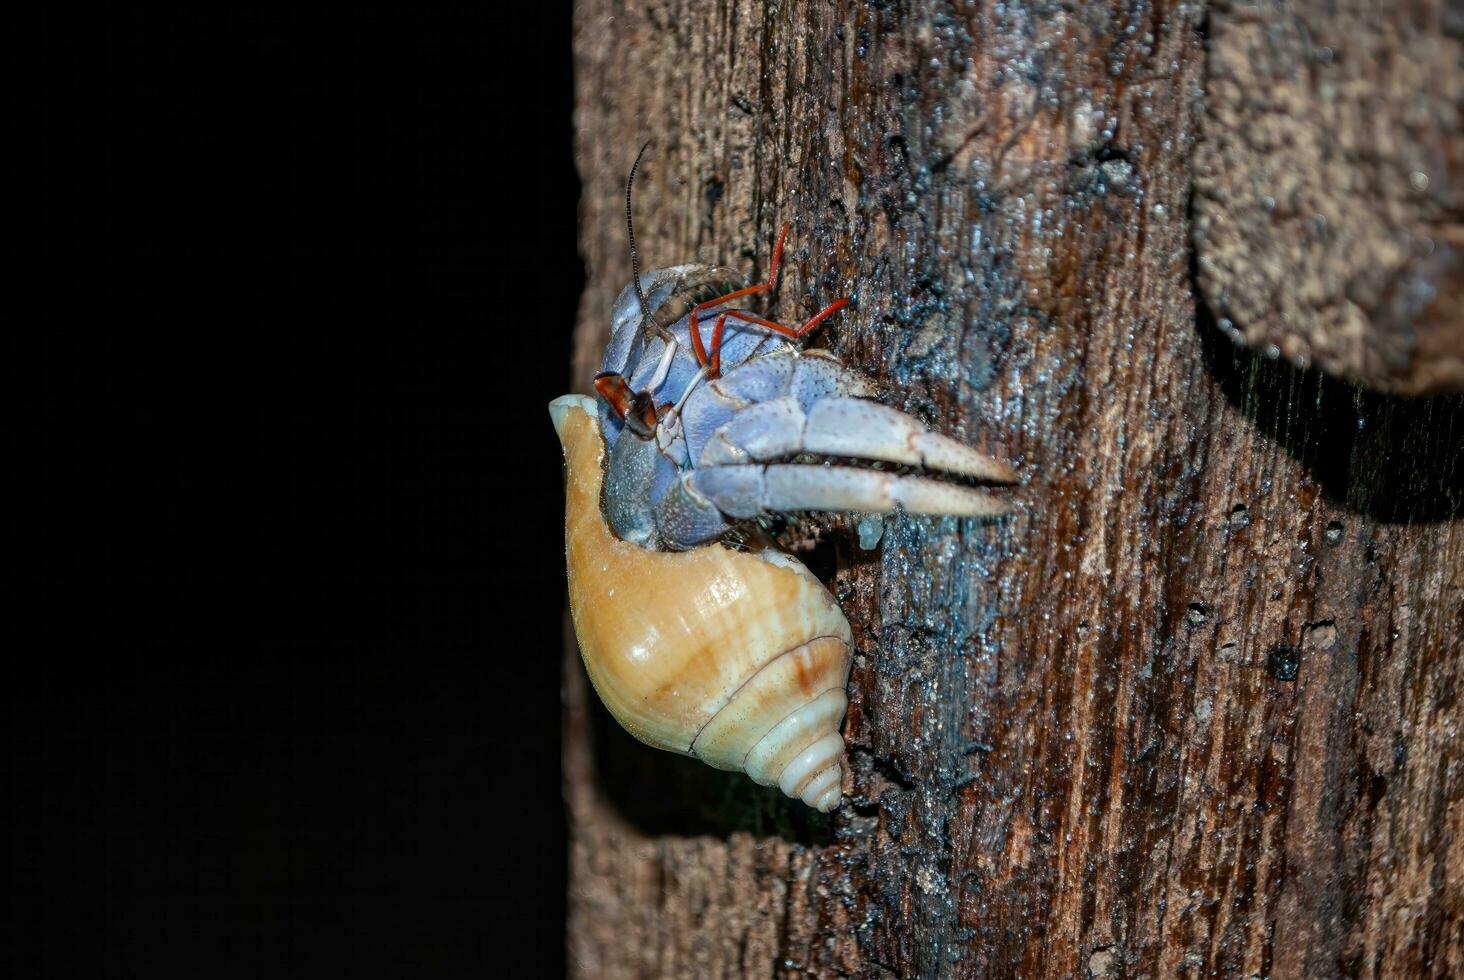 coconut crab, land hermit crab there is a shell behind its back, purple body, climbing the timber at night photo